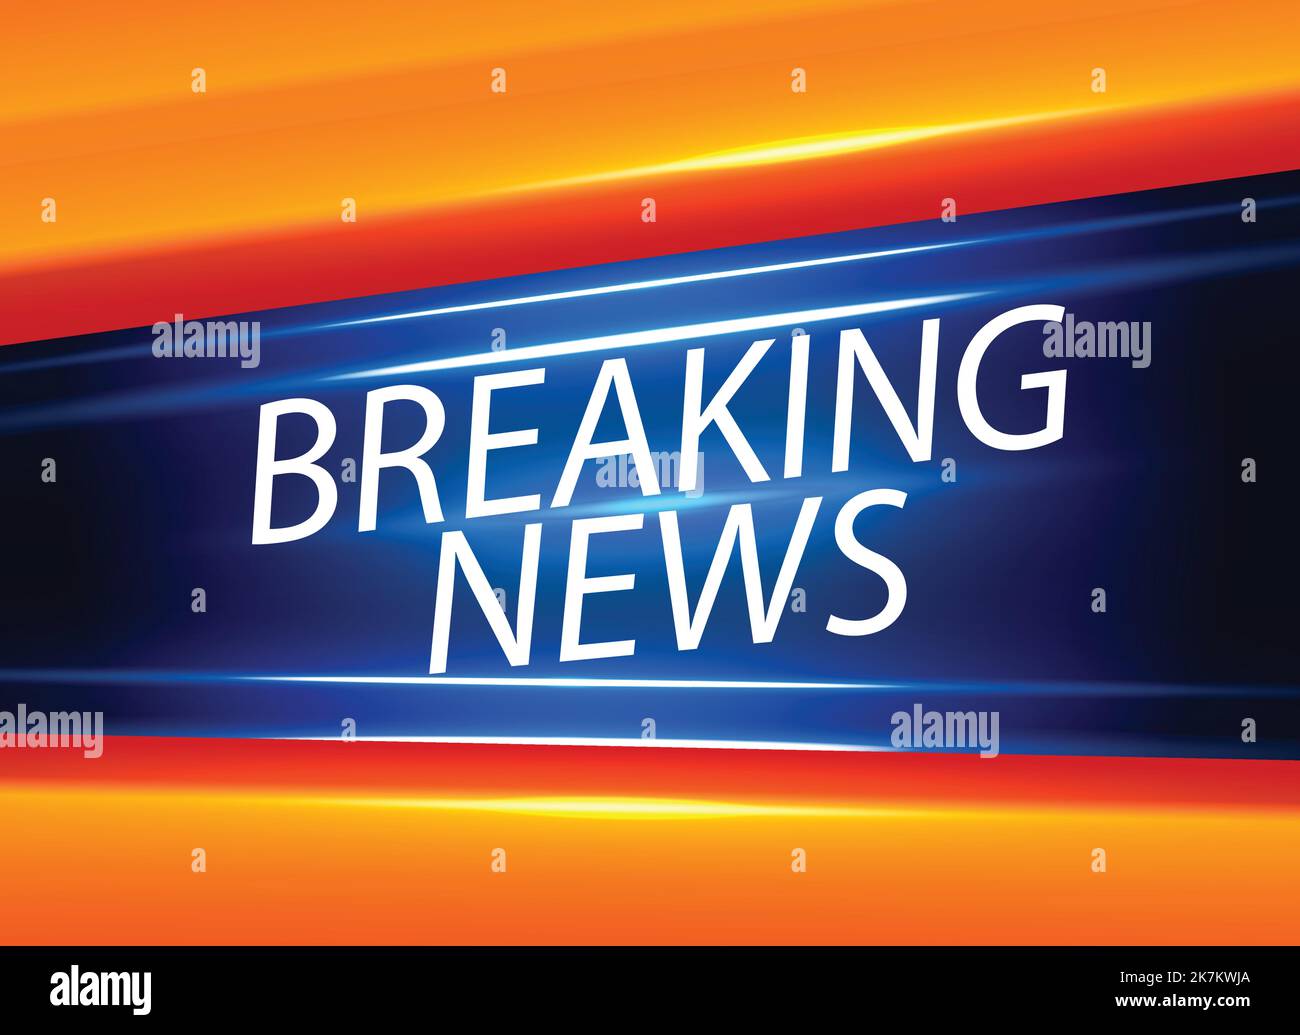 Screen saver on breaking news background. Urgent news release on  television. Breaking news live on world map background. Stock Vector